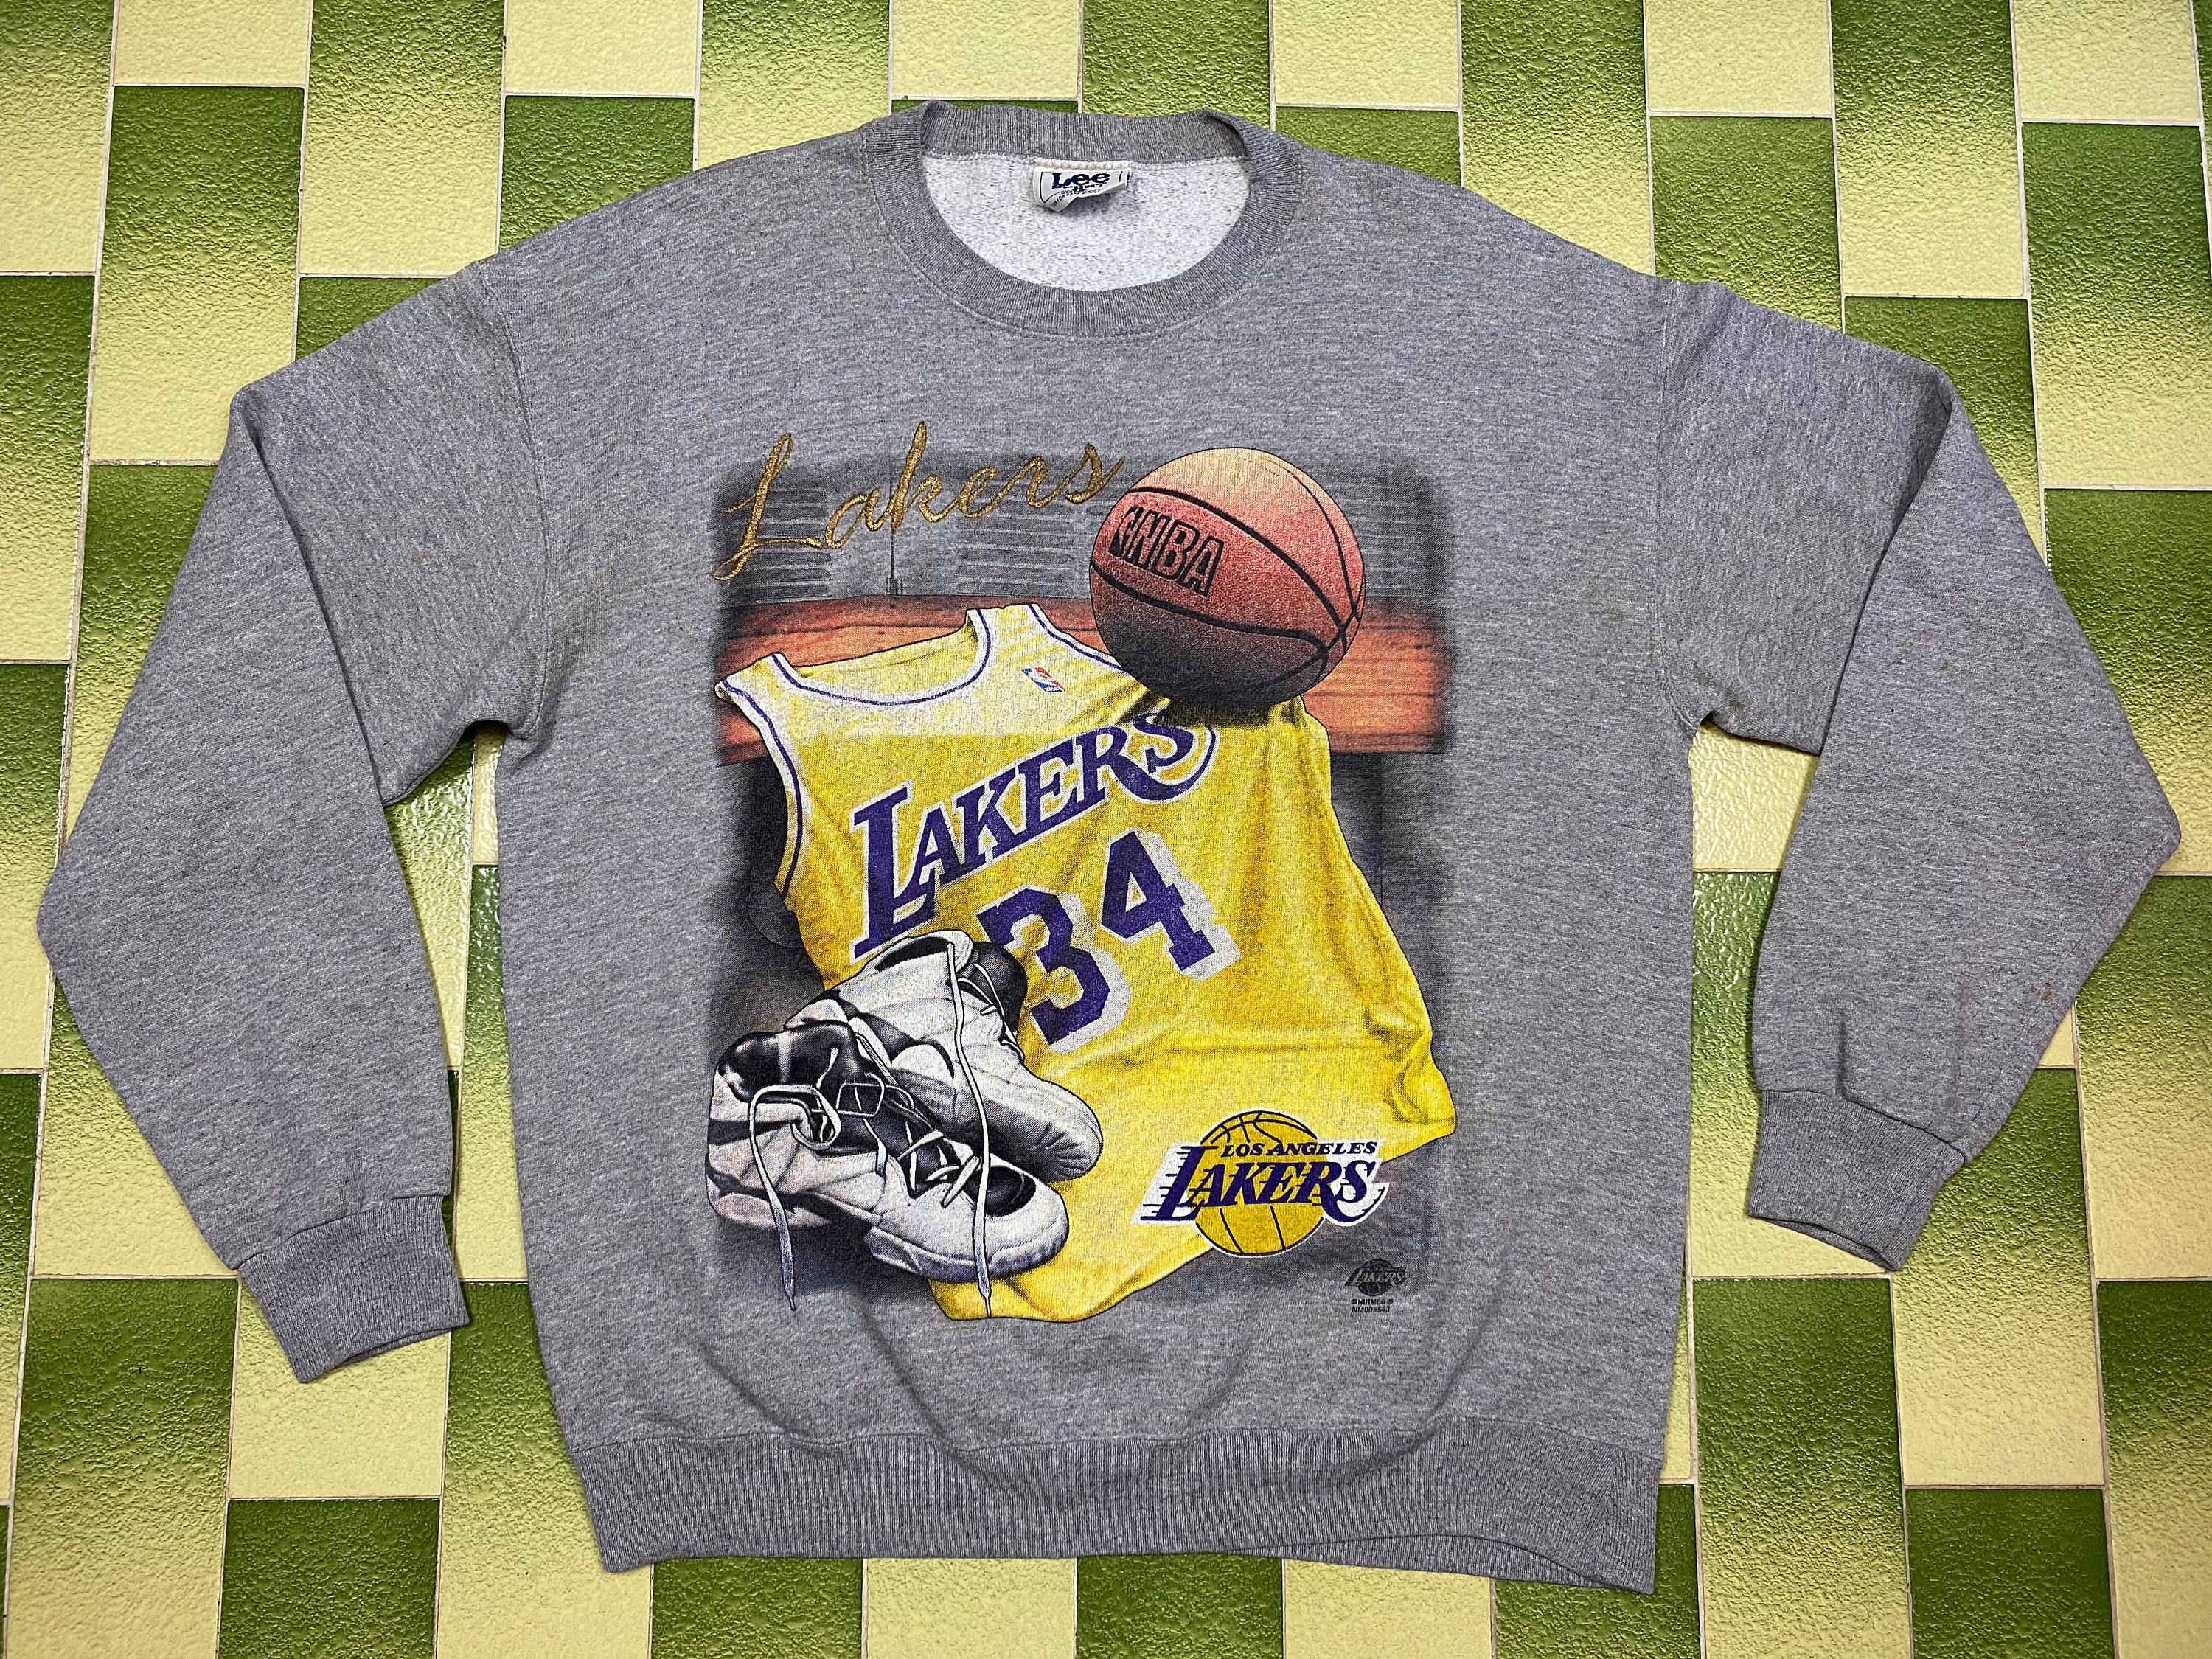 mulletguythriftscore Vintage NBA Los Angeles Lakers Sweatshirt Big Printed American Basketball Team Pullover Fits Size S-M Adult